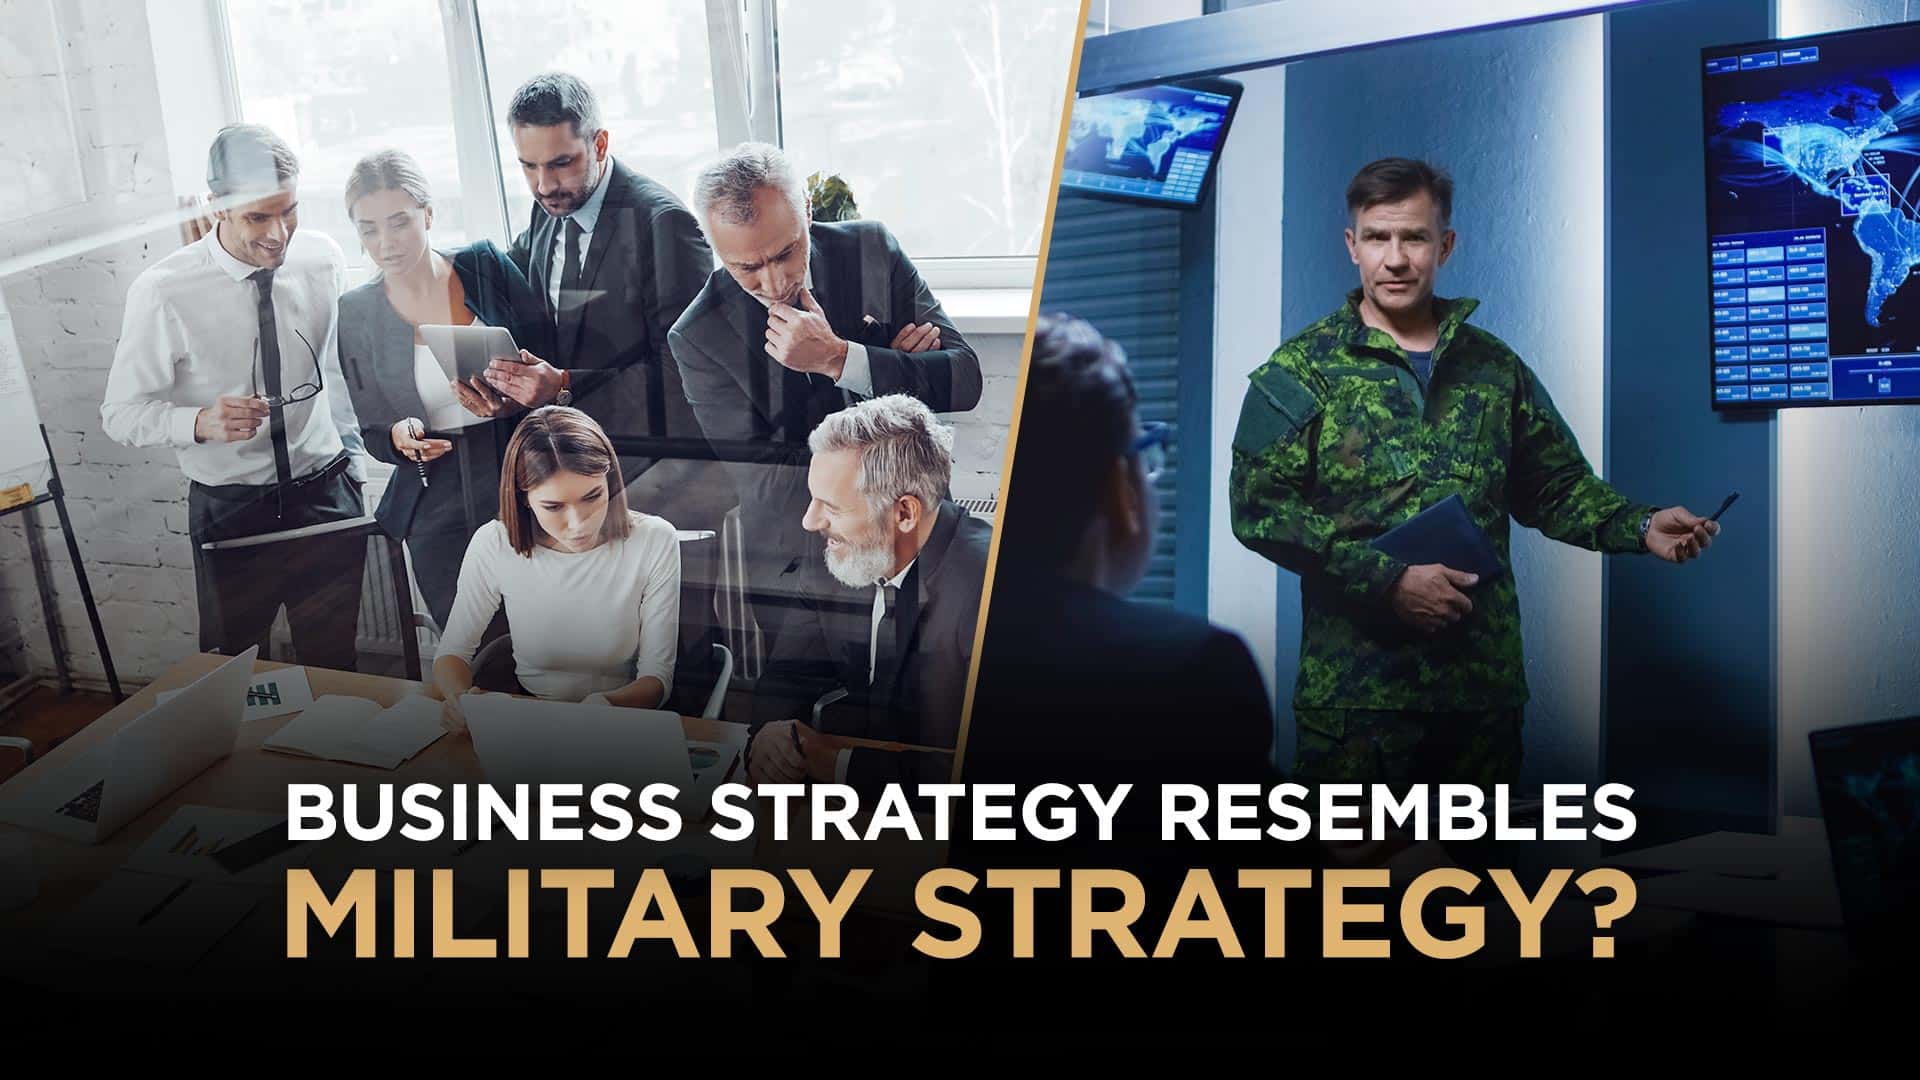 How Does Business Strategy Resemble Military Strategy